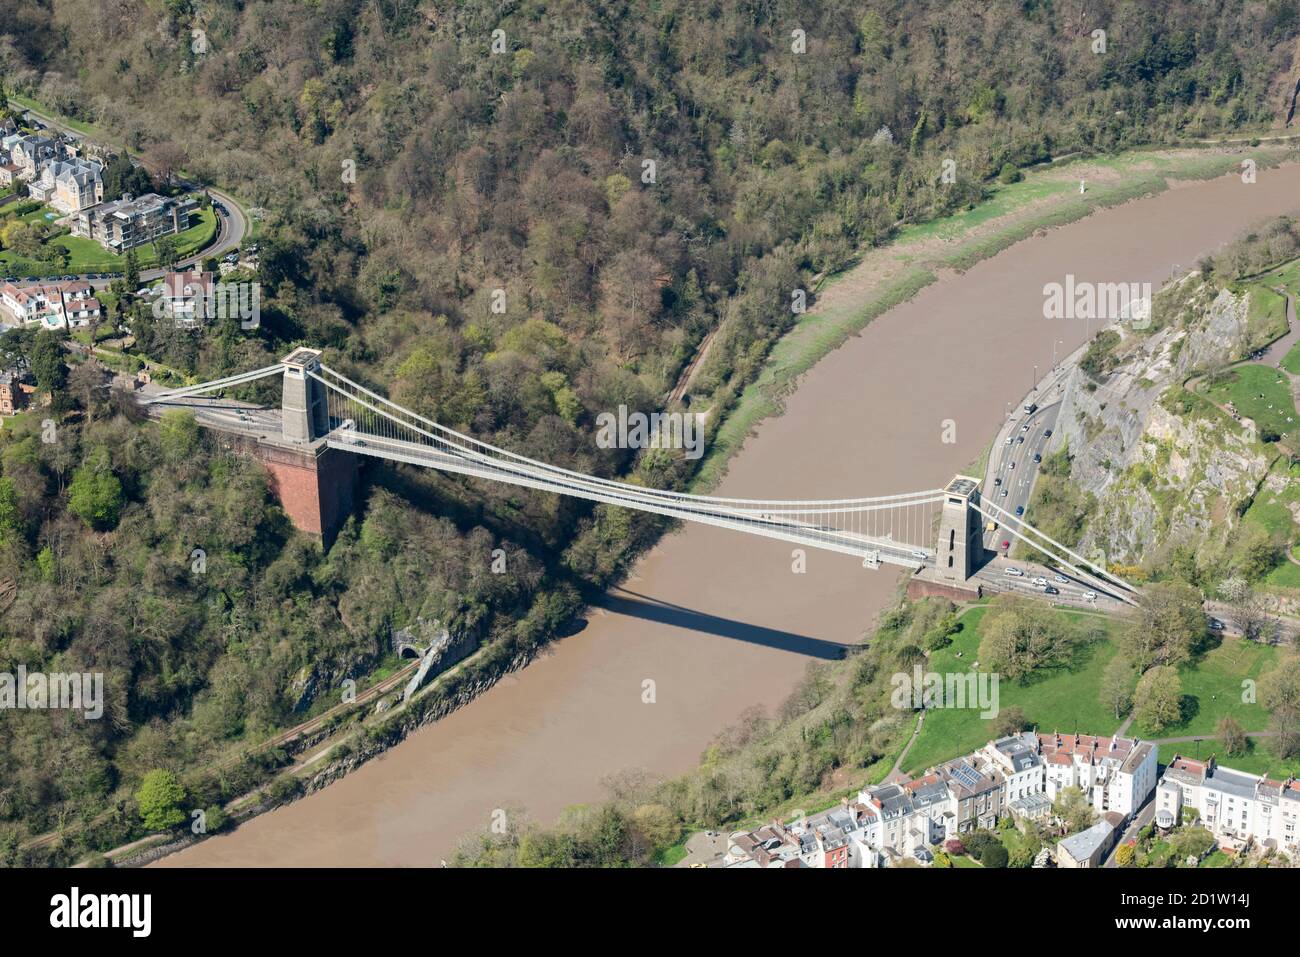 The Clifton Suspension Bridge, Designed by Isambard Kingdom Brunel in 1831, Bristol, 2018, UK. Aerial view. Stock Photo